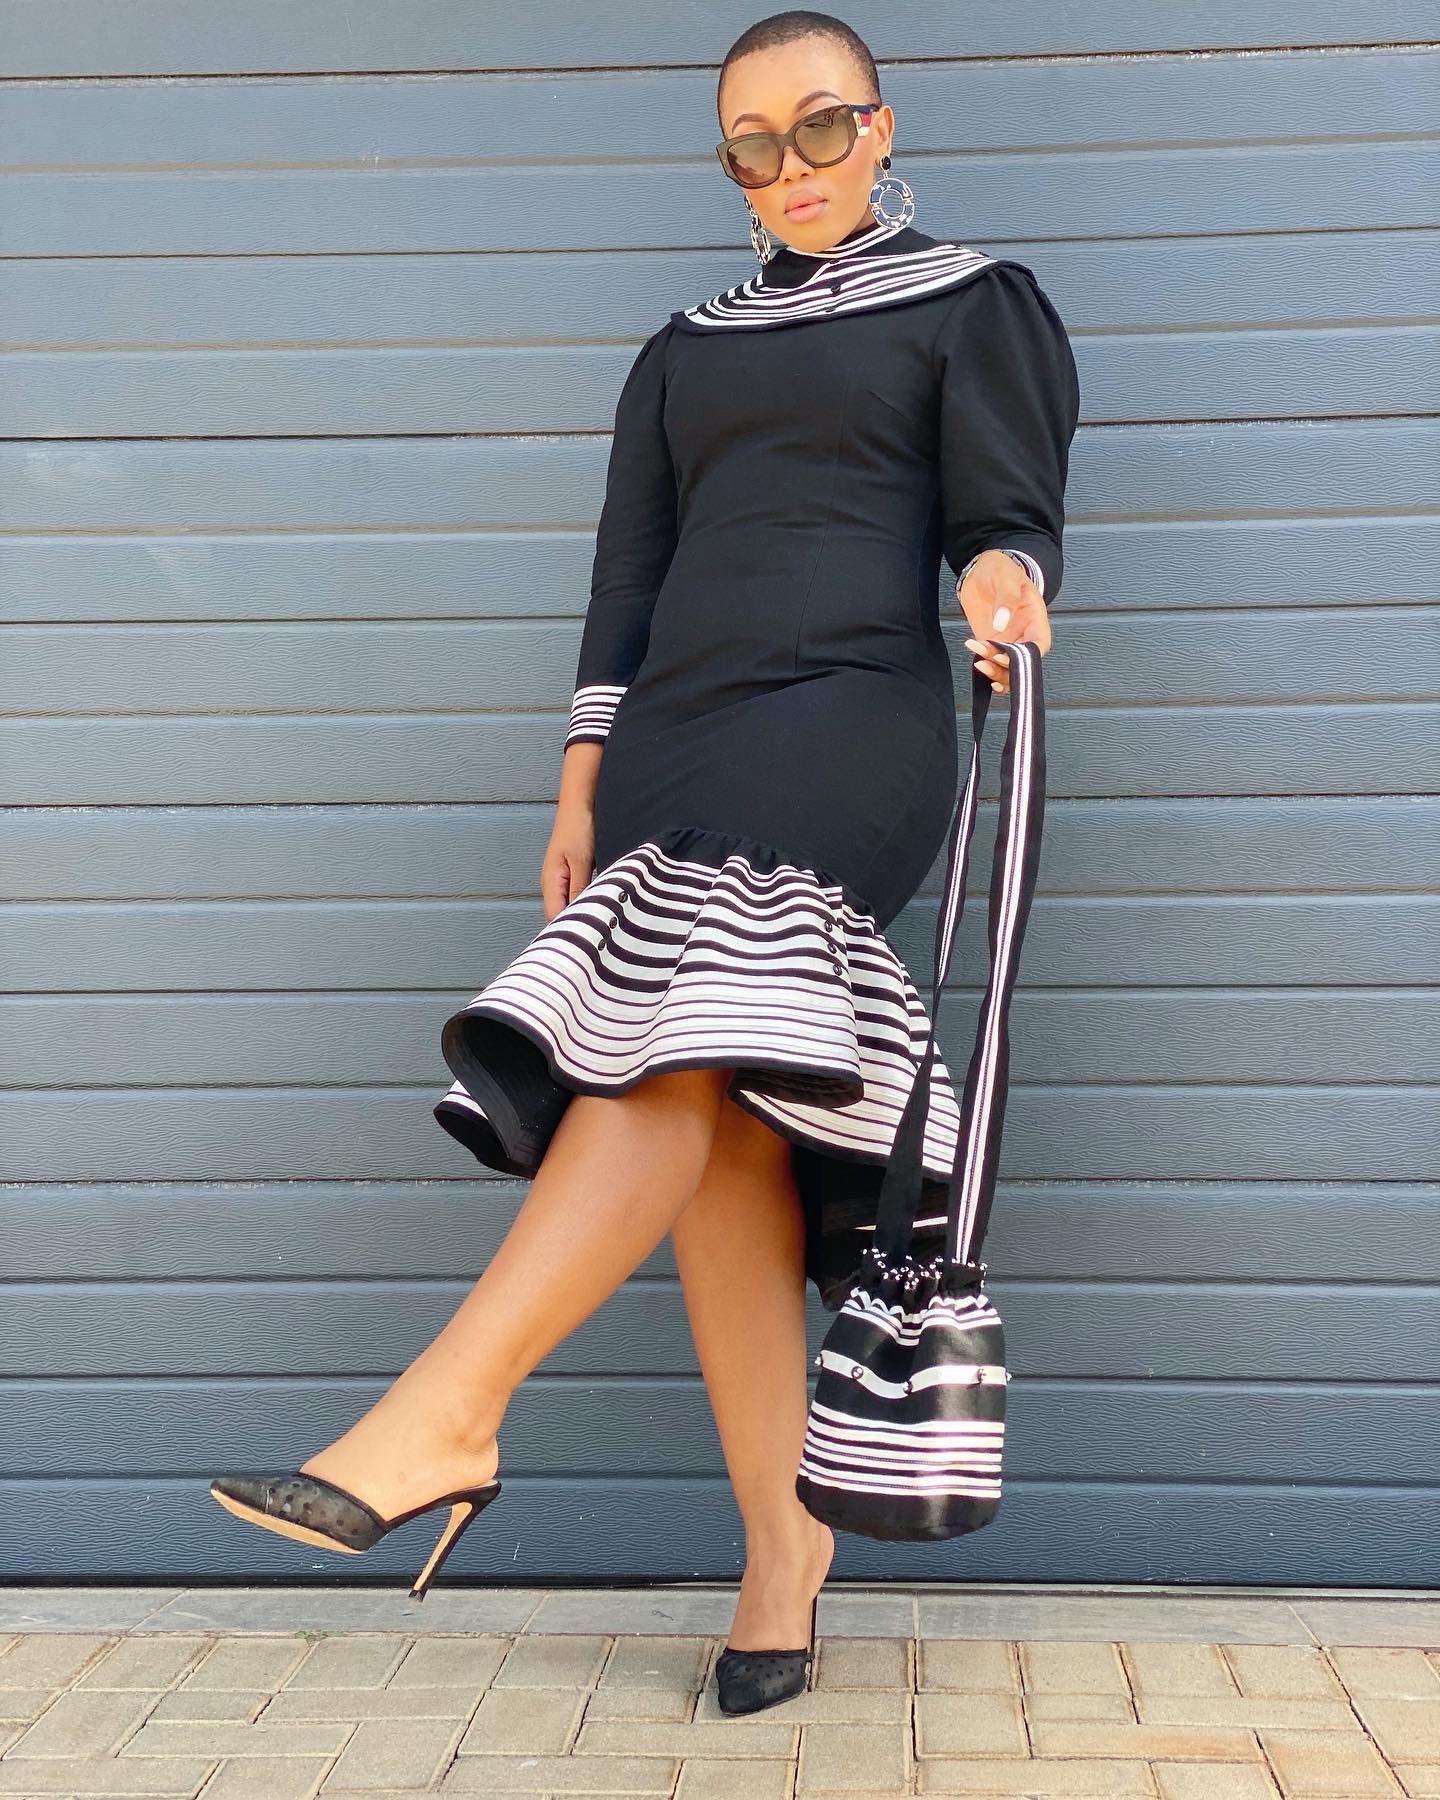 Wearing Xhosa Heritage: Dresses that Sing with Cultural Pride 18